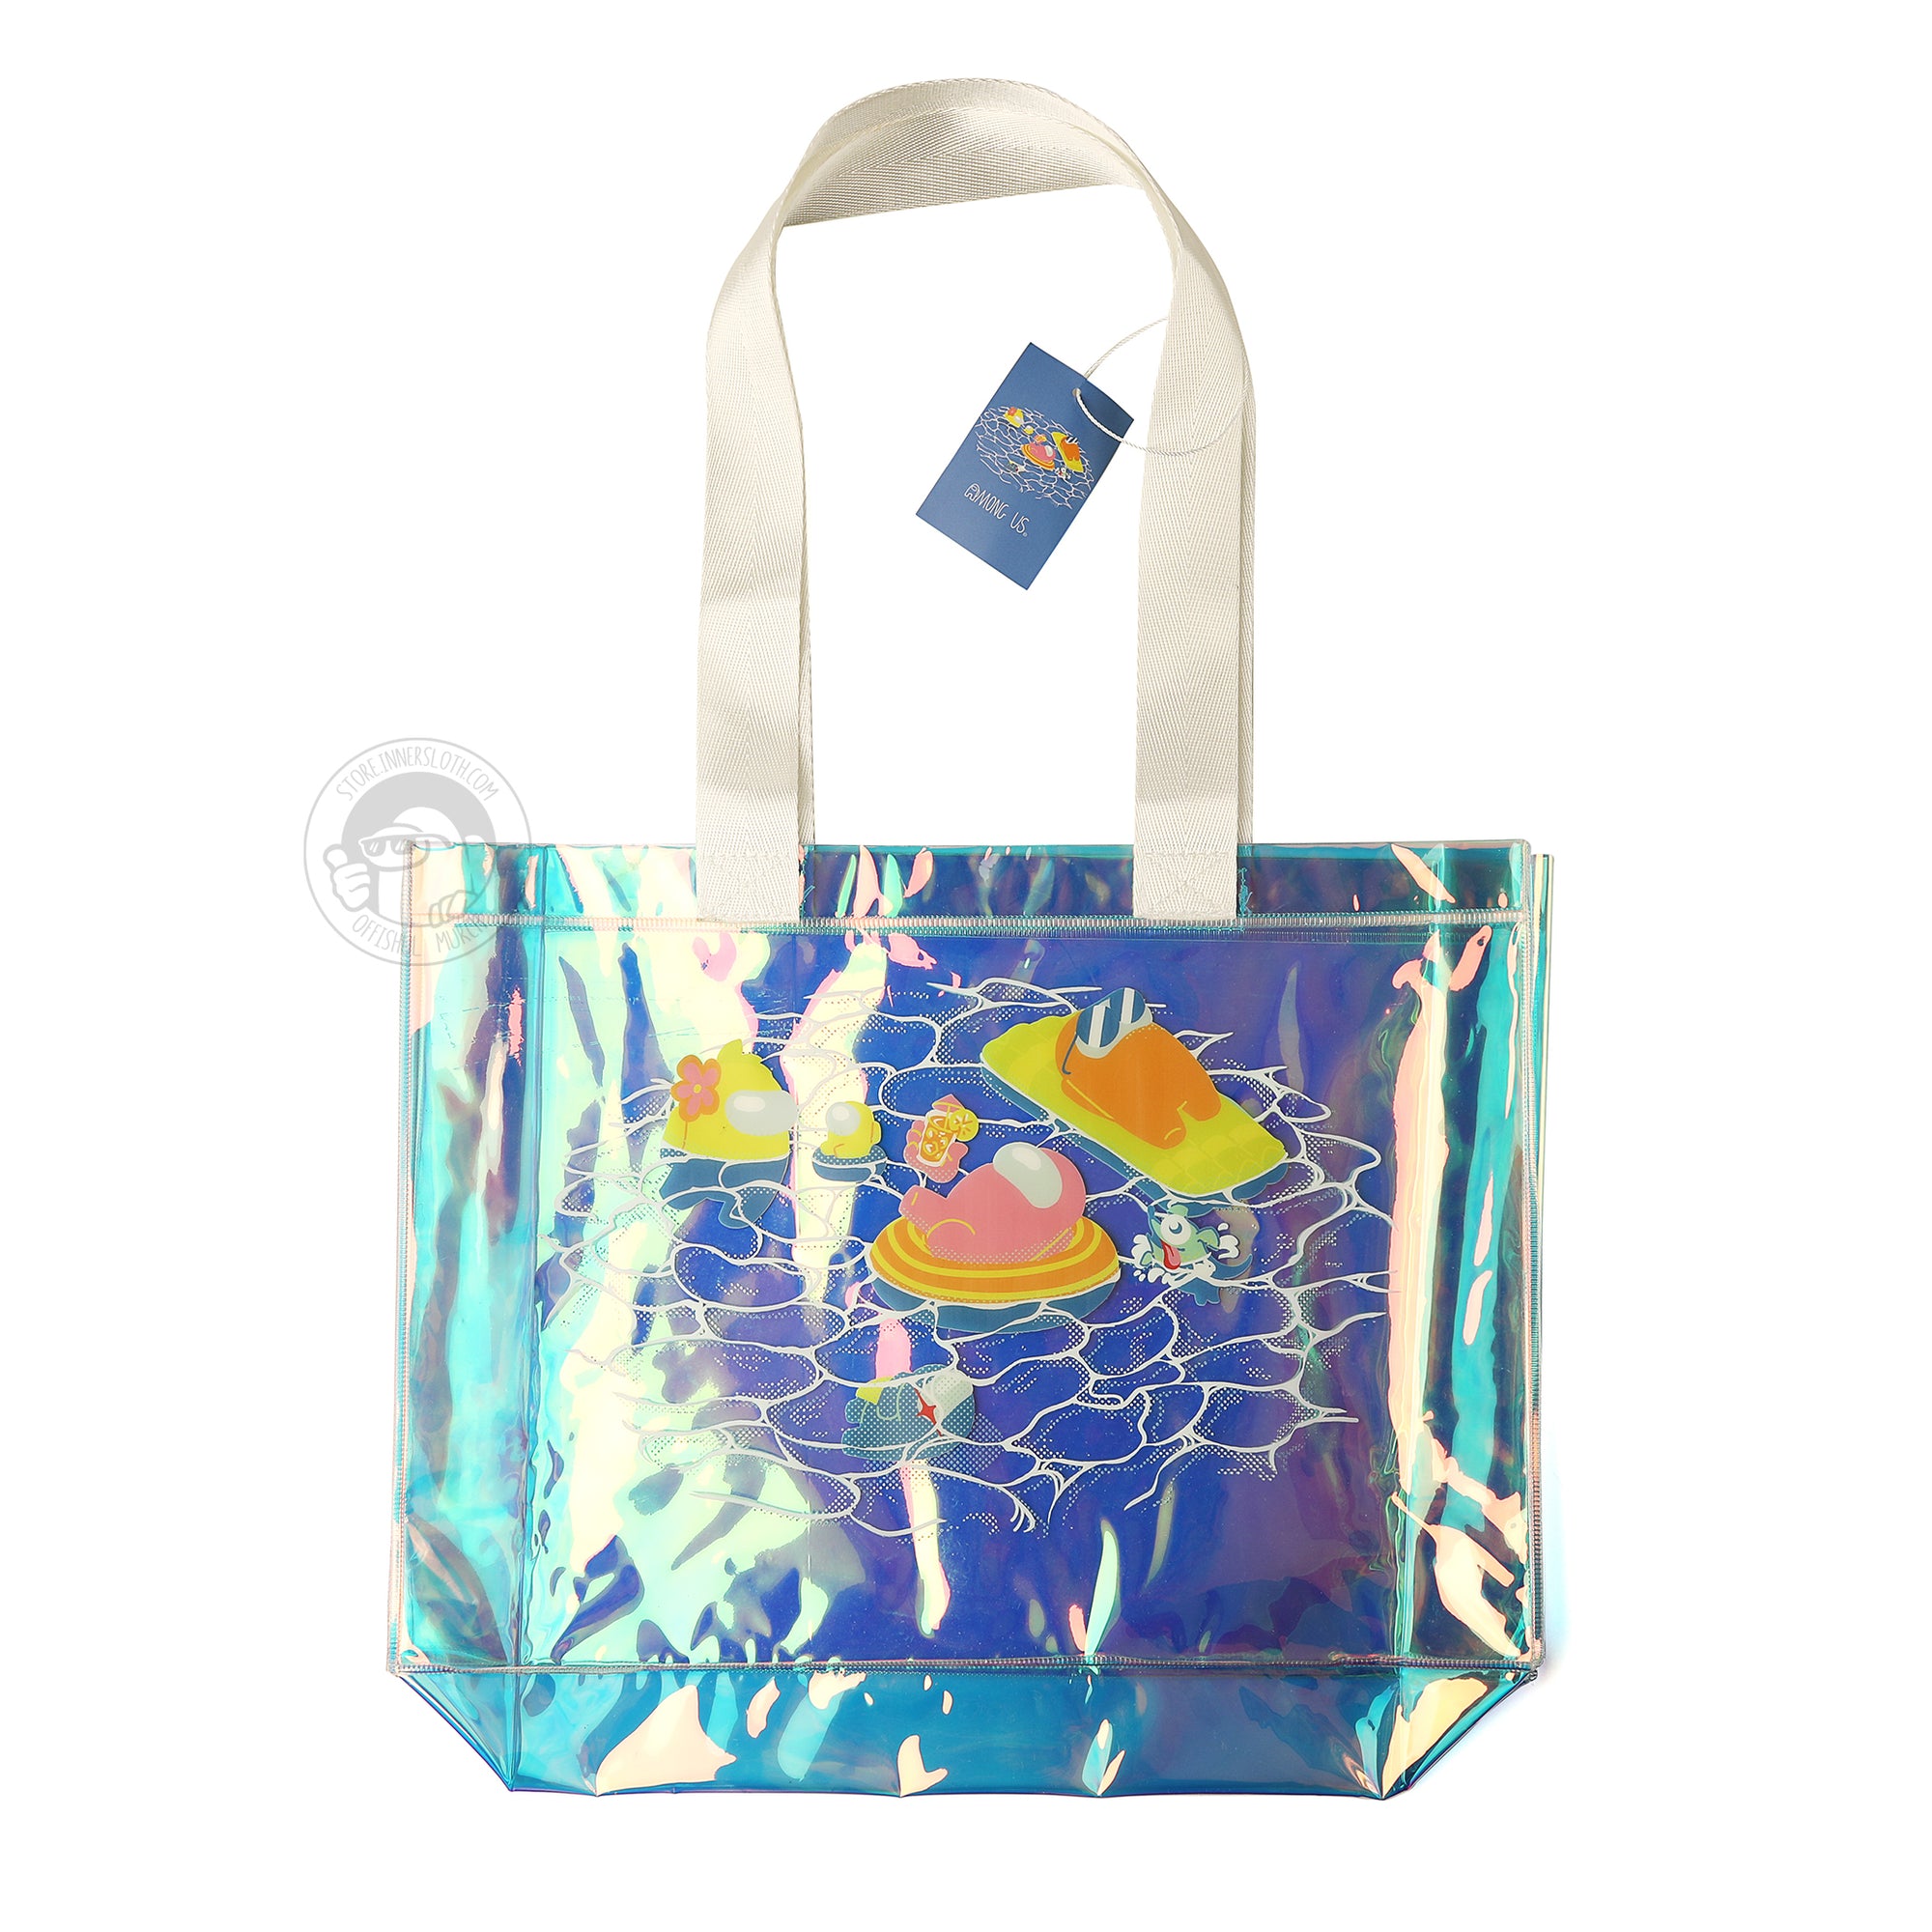 A product photo of the Among Us: Swimming Pool Tote. The tote is iridescent blue with natural canvas straps. The tote shows a pink crewmate lounging in an orange floatie. A large yellow crewmate observes a yellow mini crewmate, in a tiny floatie. An orange crewmate, wearing sunglasses, sun bathes on a big lime pool floatie.You can also see a snorkeling space dog and an impostor at the bottom of the pool. White lineart delineates ripples in the water.